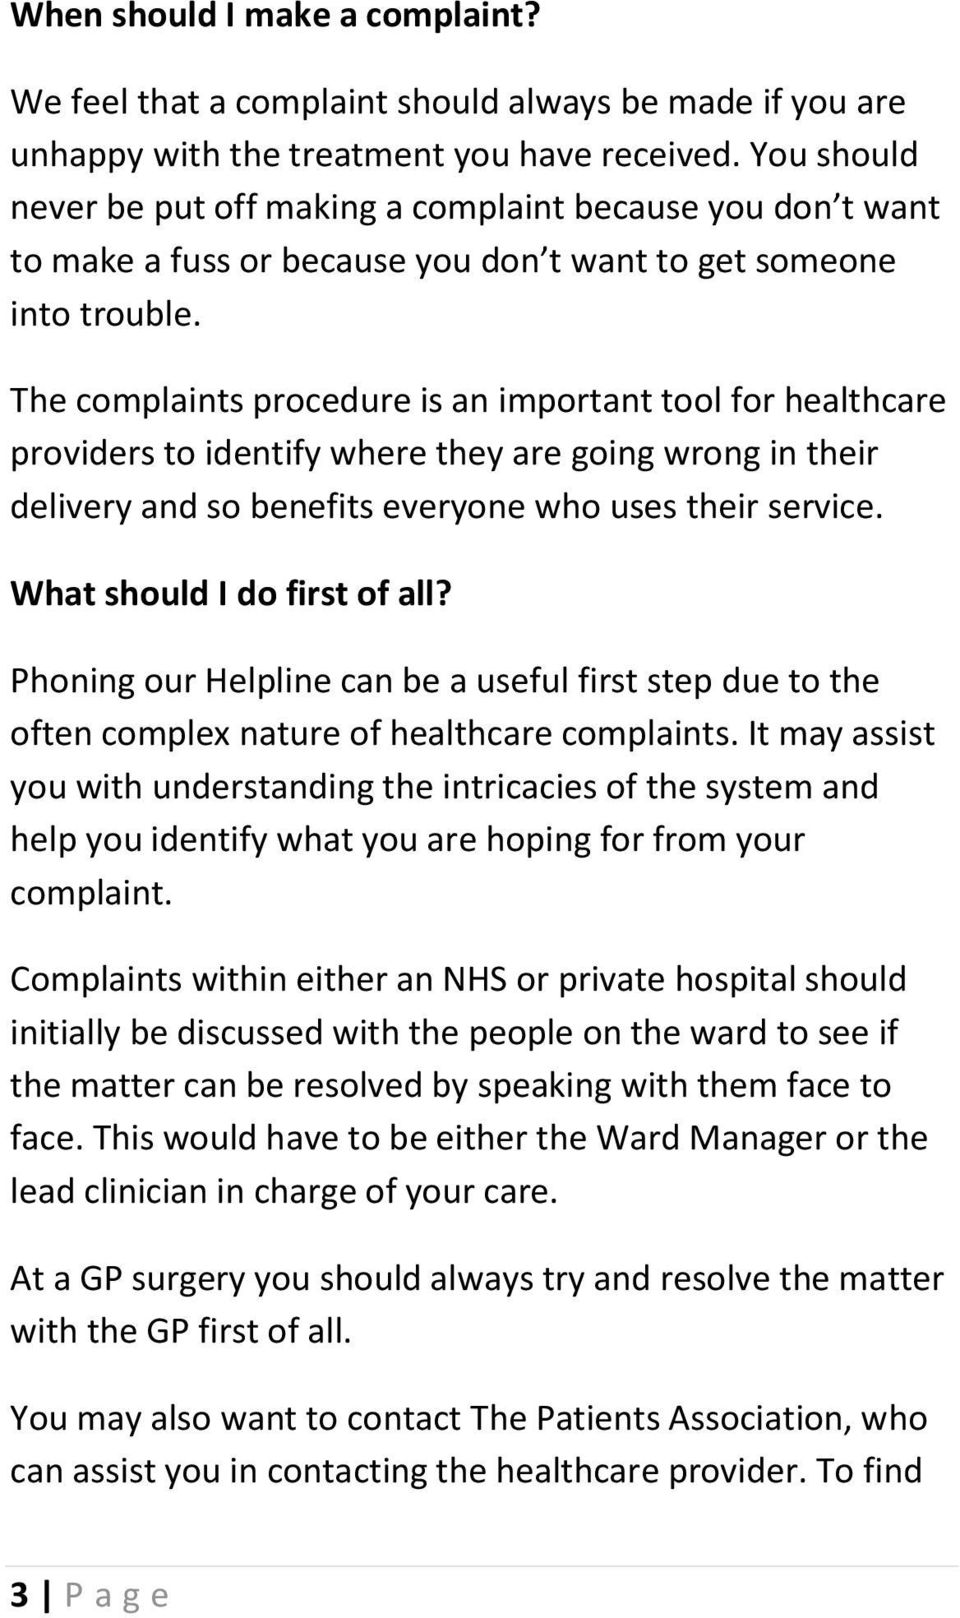 The complaints procedure is an important tool for healthcare providers to identify where they are going wrong in their delivery and so benefits everyone who uses their service.